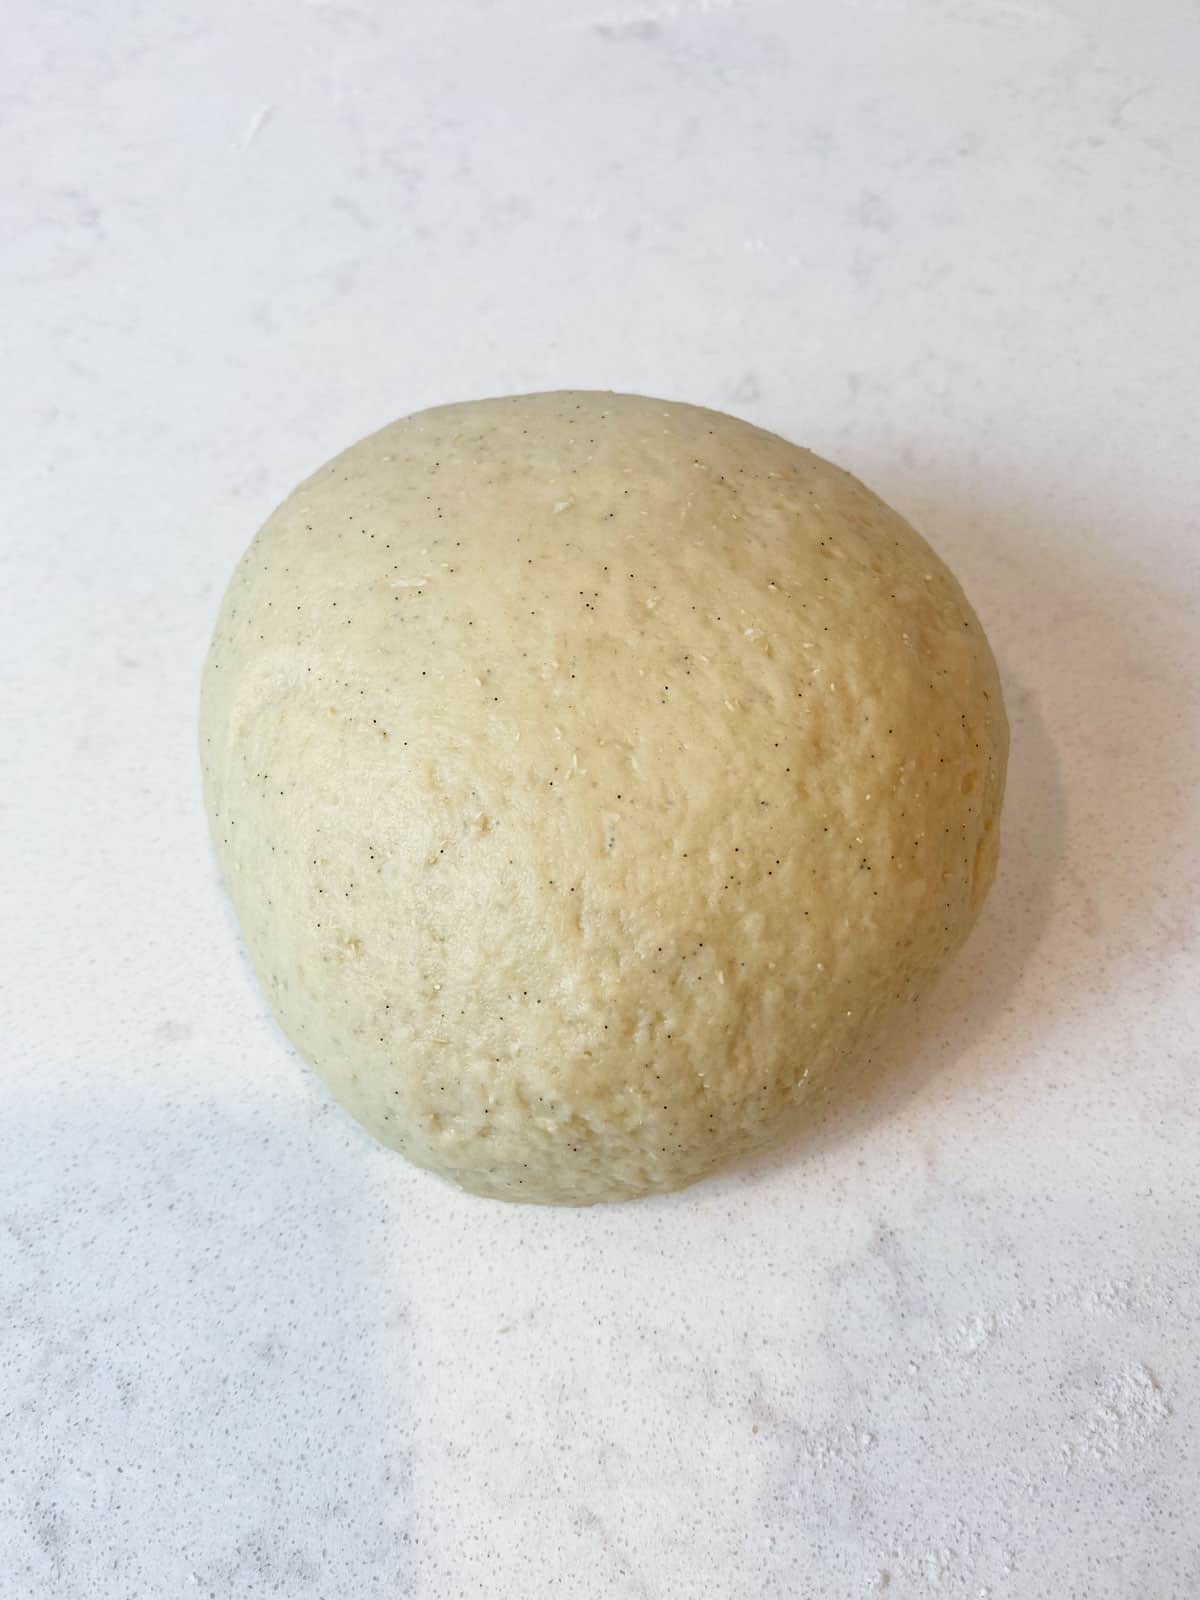 Knead the makowiec dough into a small round ball.